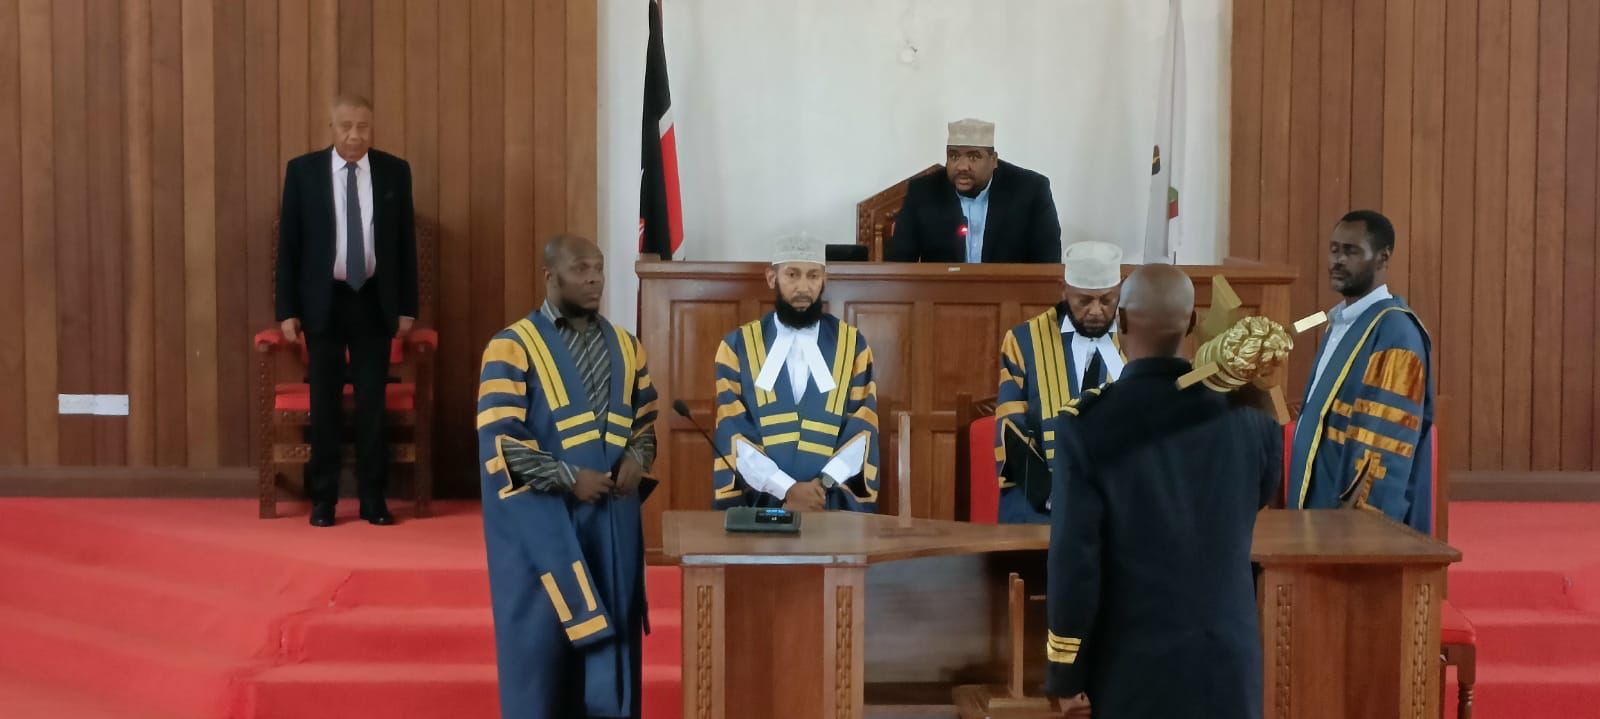 OFFICIAL OPENING OF THE THIRD LAMU COUNTY ASSEMBLY